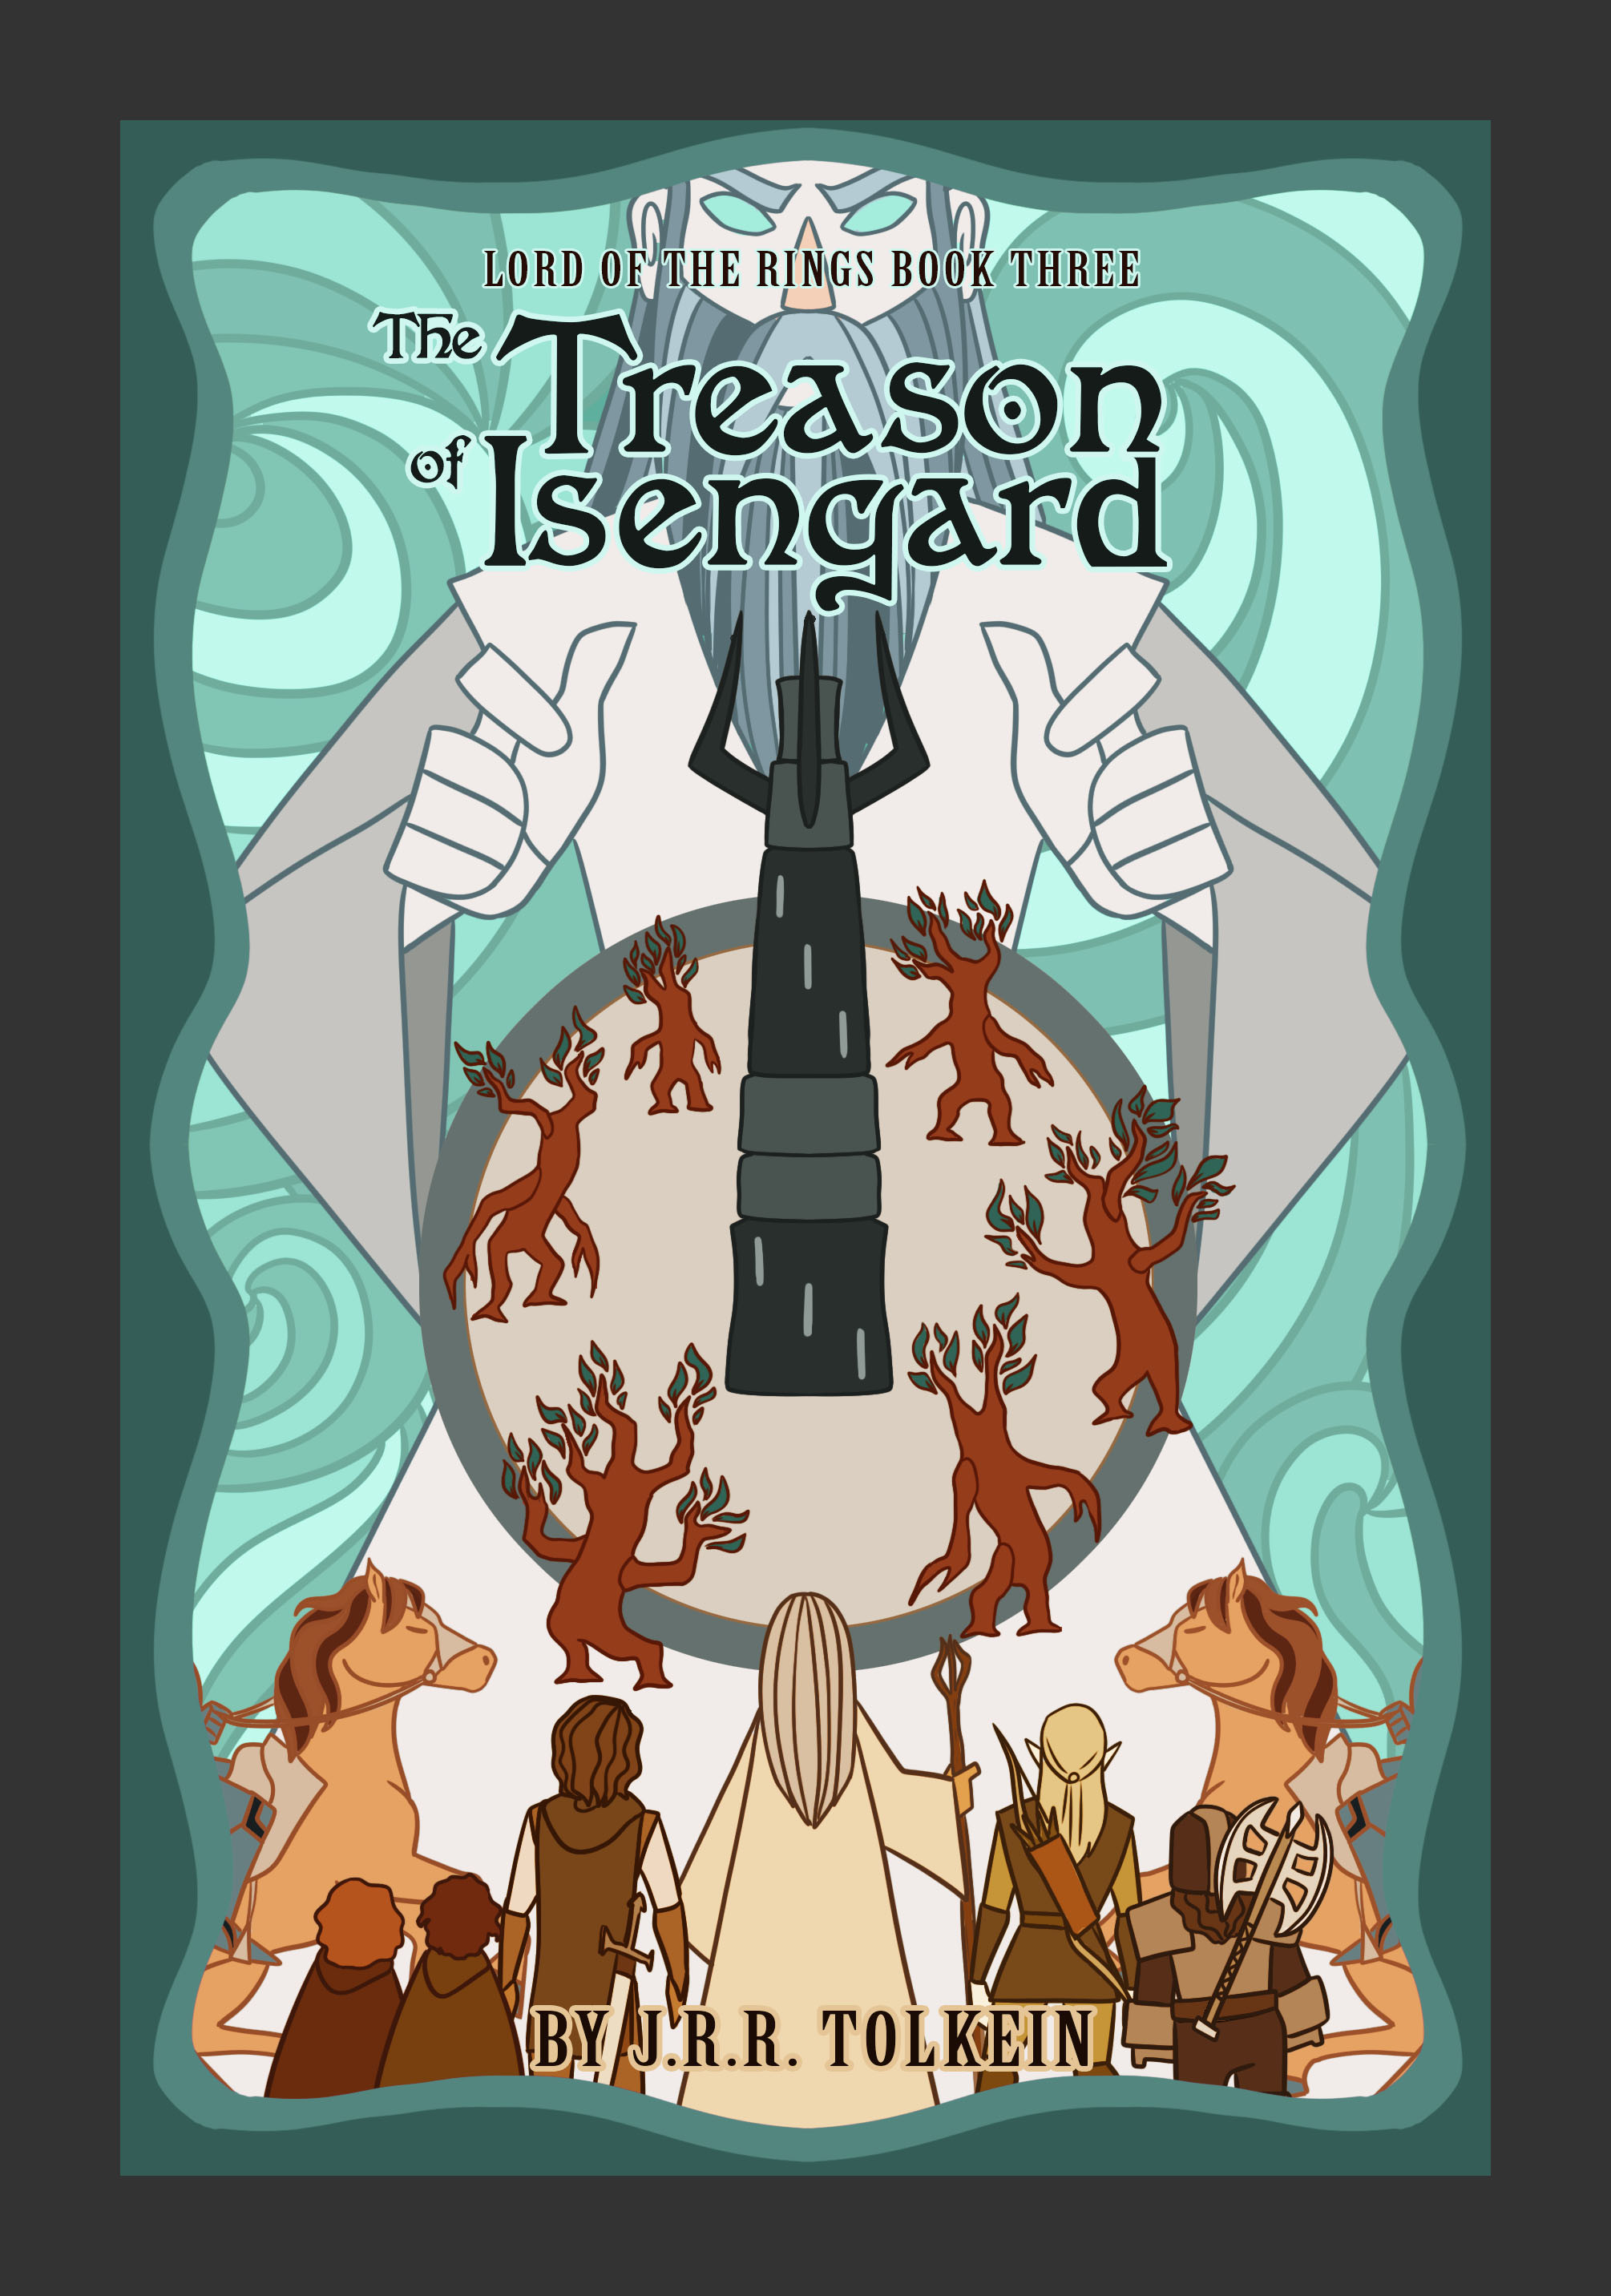 Cover for book three: The Treason of Isengard (first half of The Two Towers)